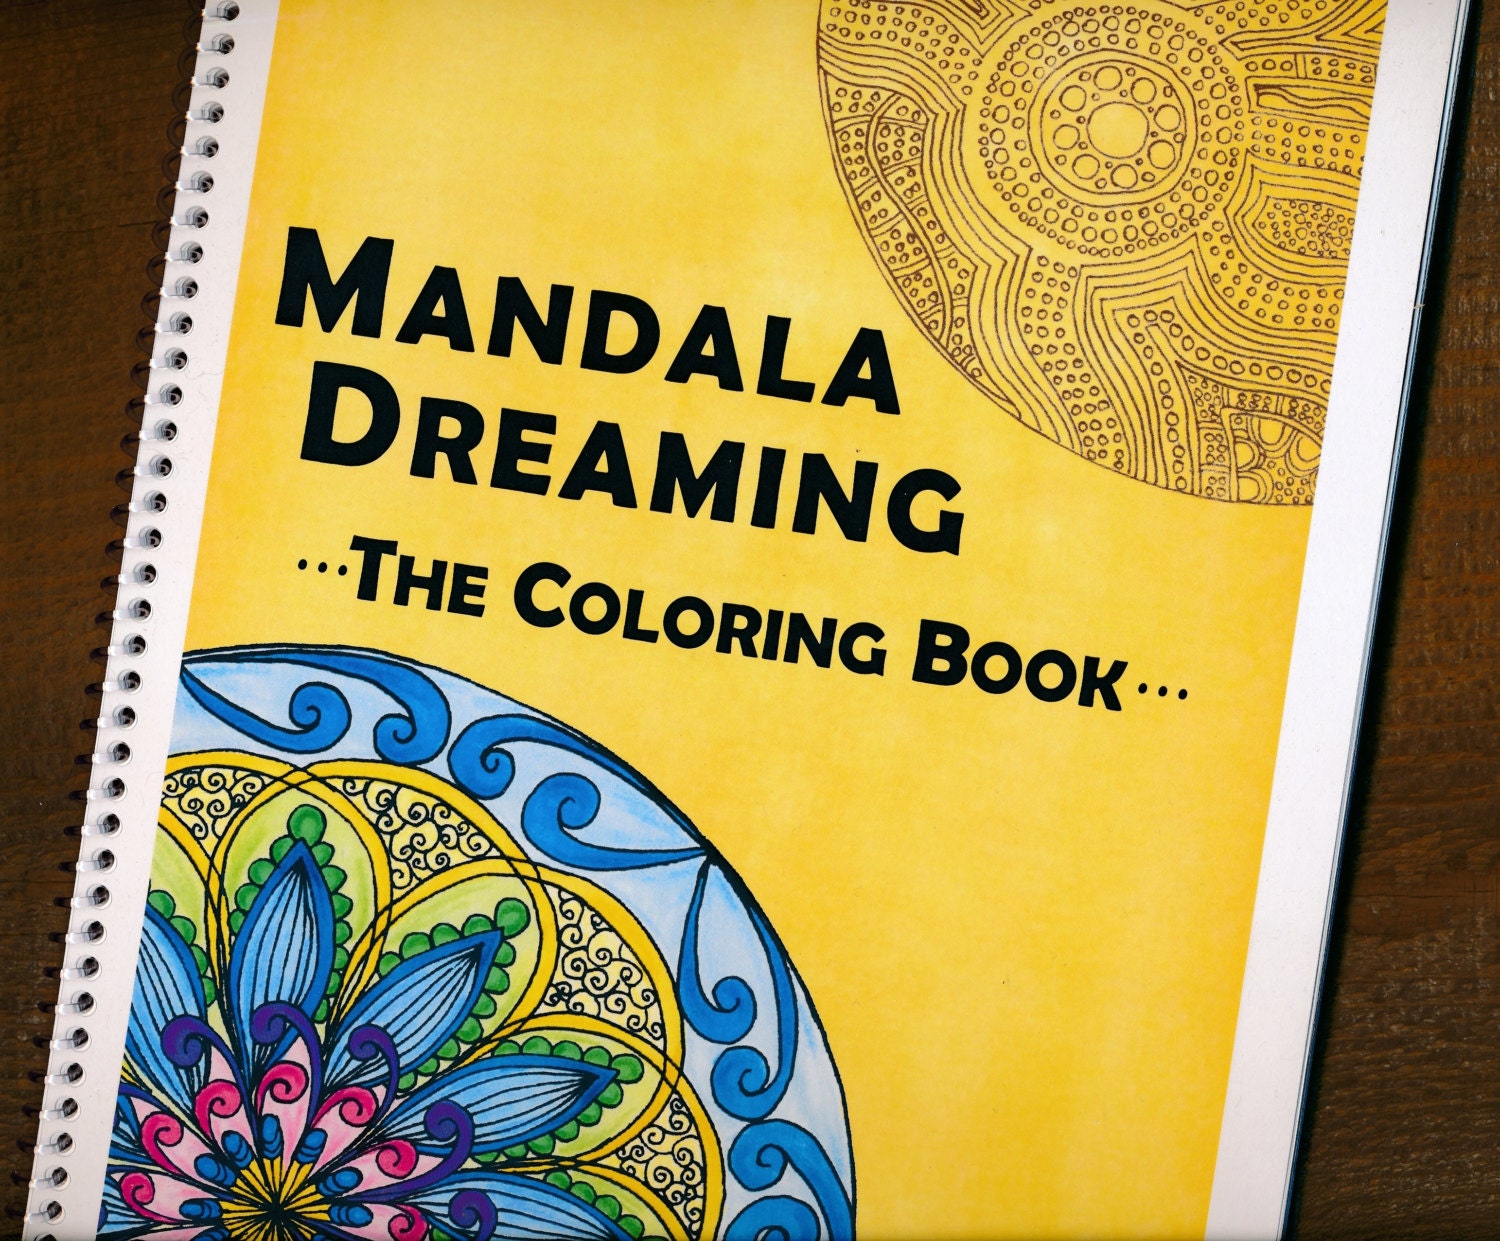 Relax therapy: mandalas coloring books for adults coloring for mindfulness  design to relax and free your mind. (Paperback)